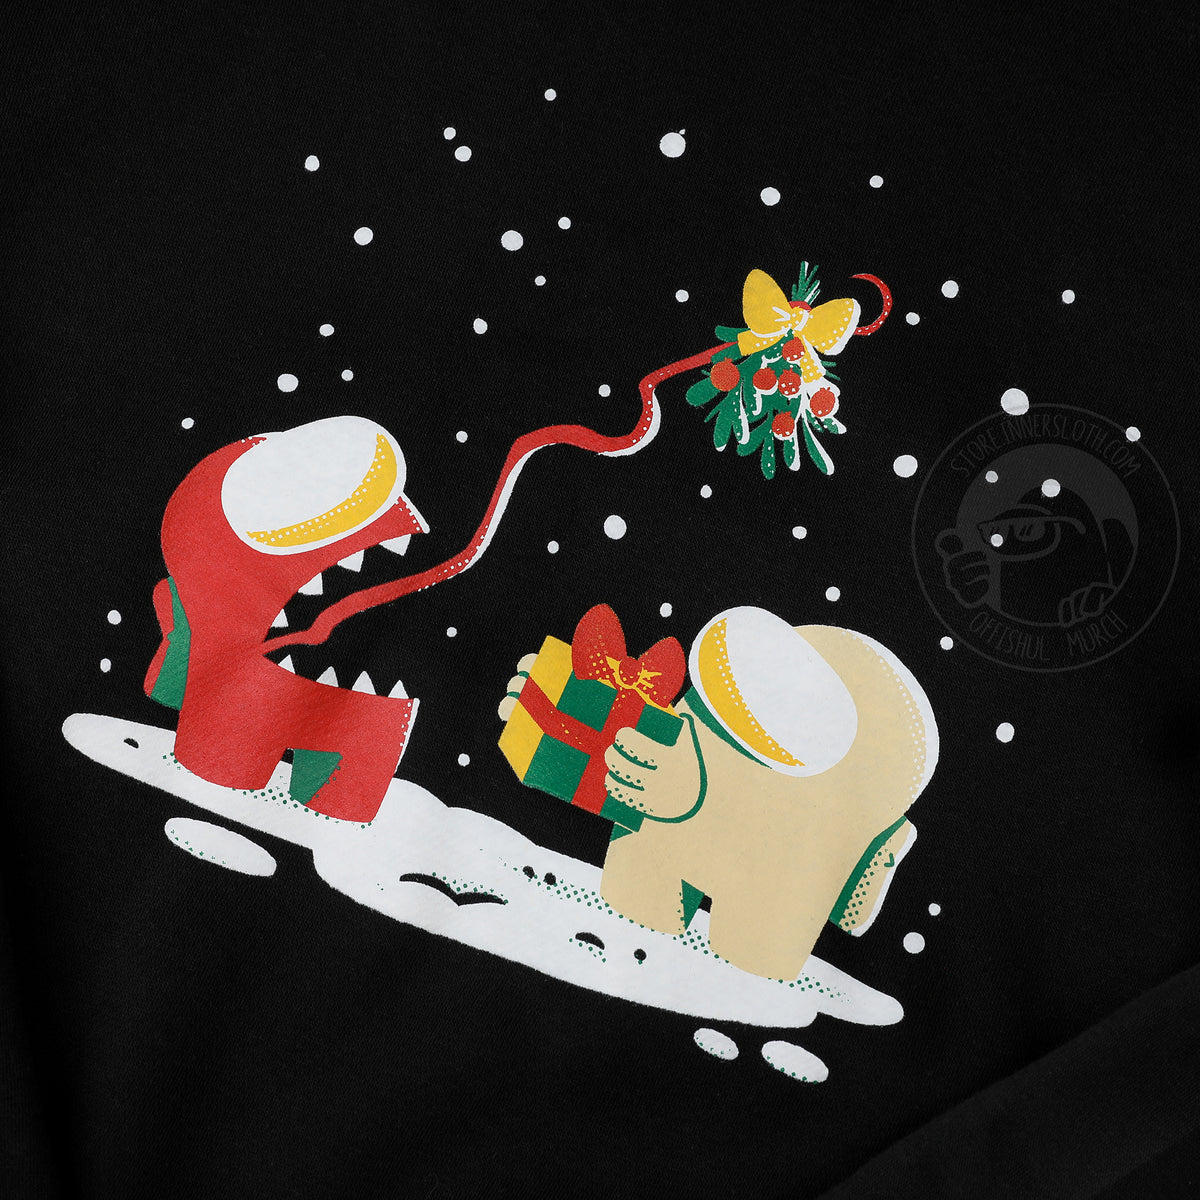 A close up photograph of the center shirt design. The illustration depicts a snowy scene of a banana Crewmate holding a wrapped gift while the red Impostor uses its tongue to hold up a mistletoe overhead.